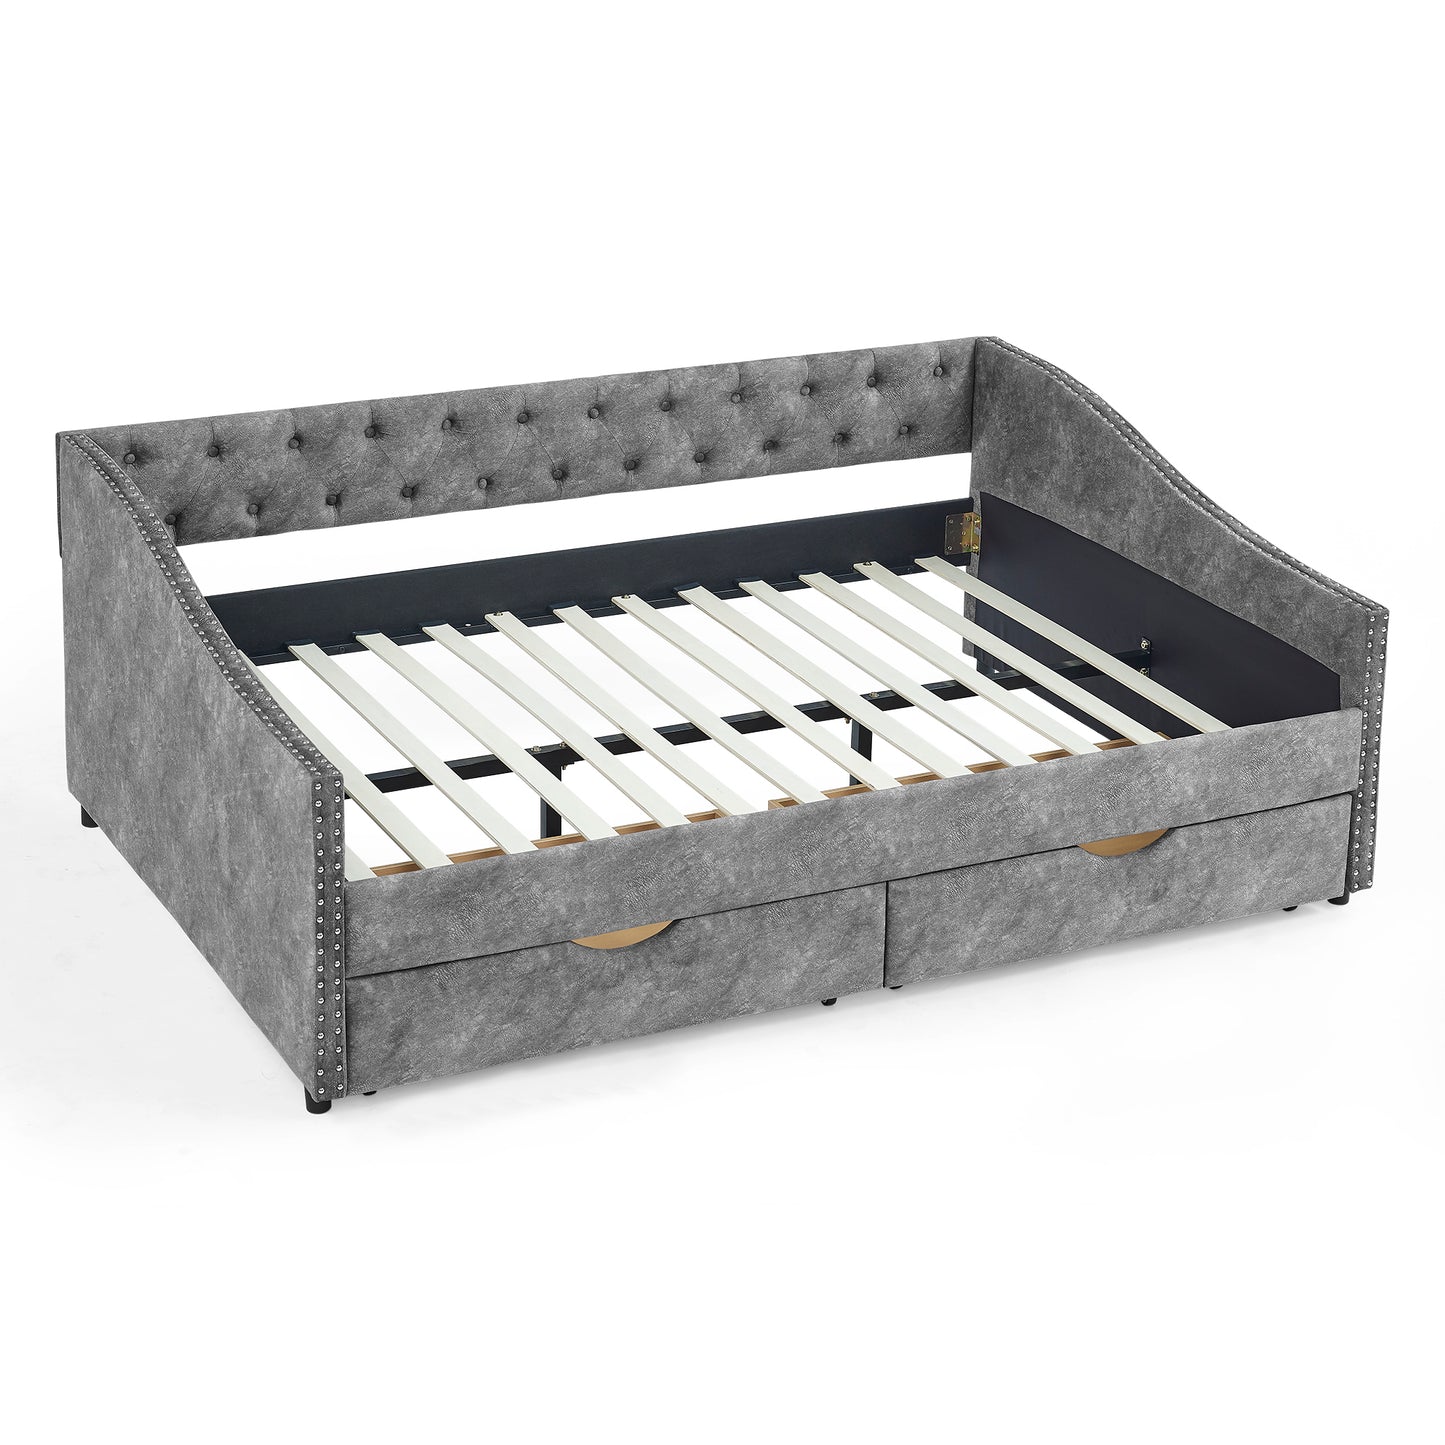 Button Dark Gray Daybed with Drawers (Full)